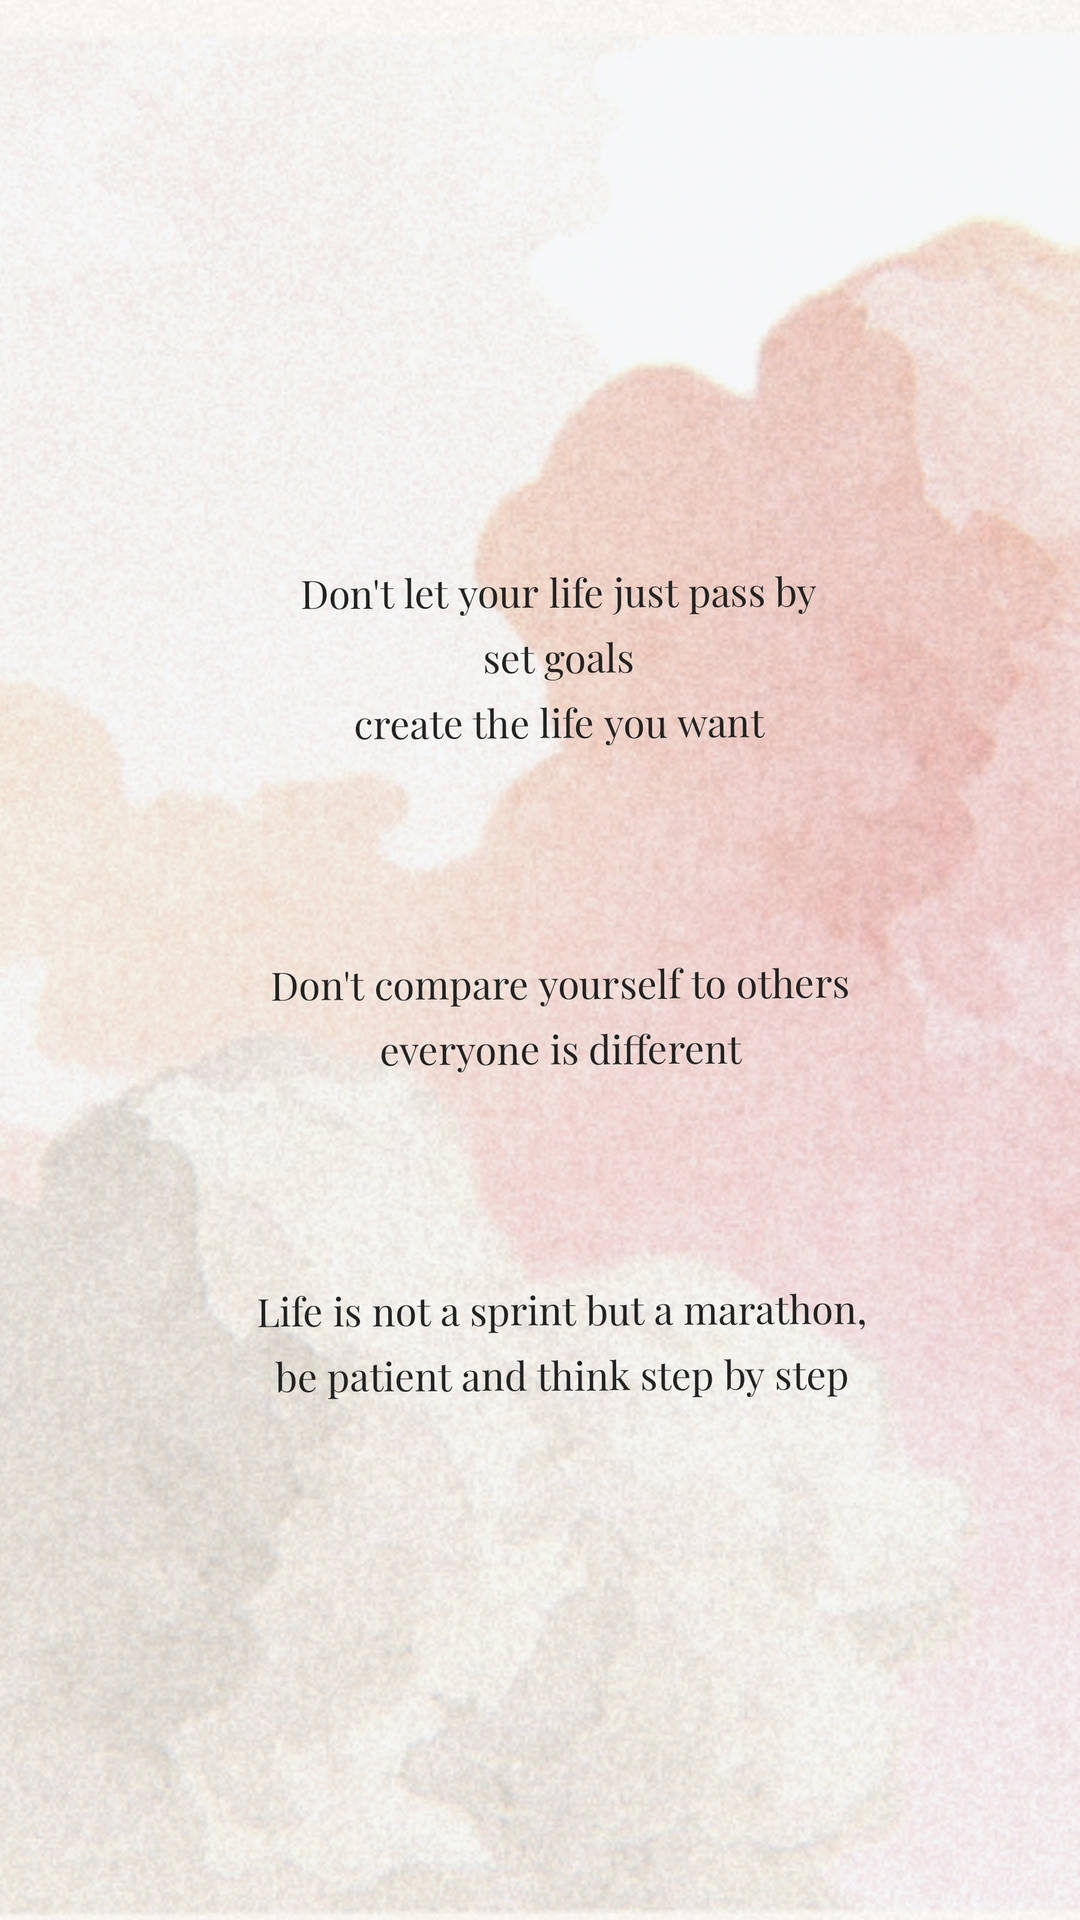 Free Motivational Quotes Iphone Wallpaper Downloads, [200+] Motivational  Quotes Iphone Wallpapers for FREE 